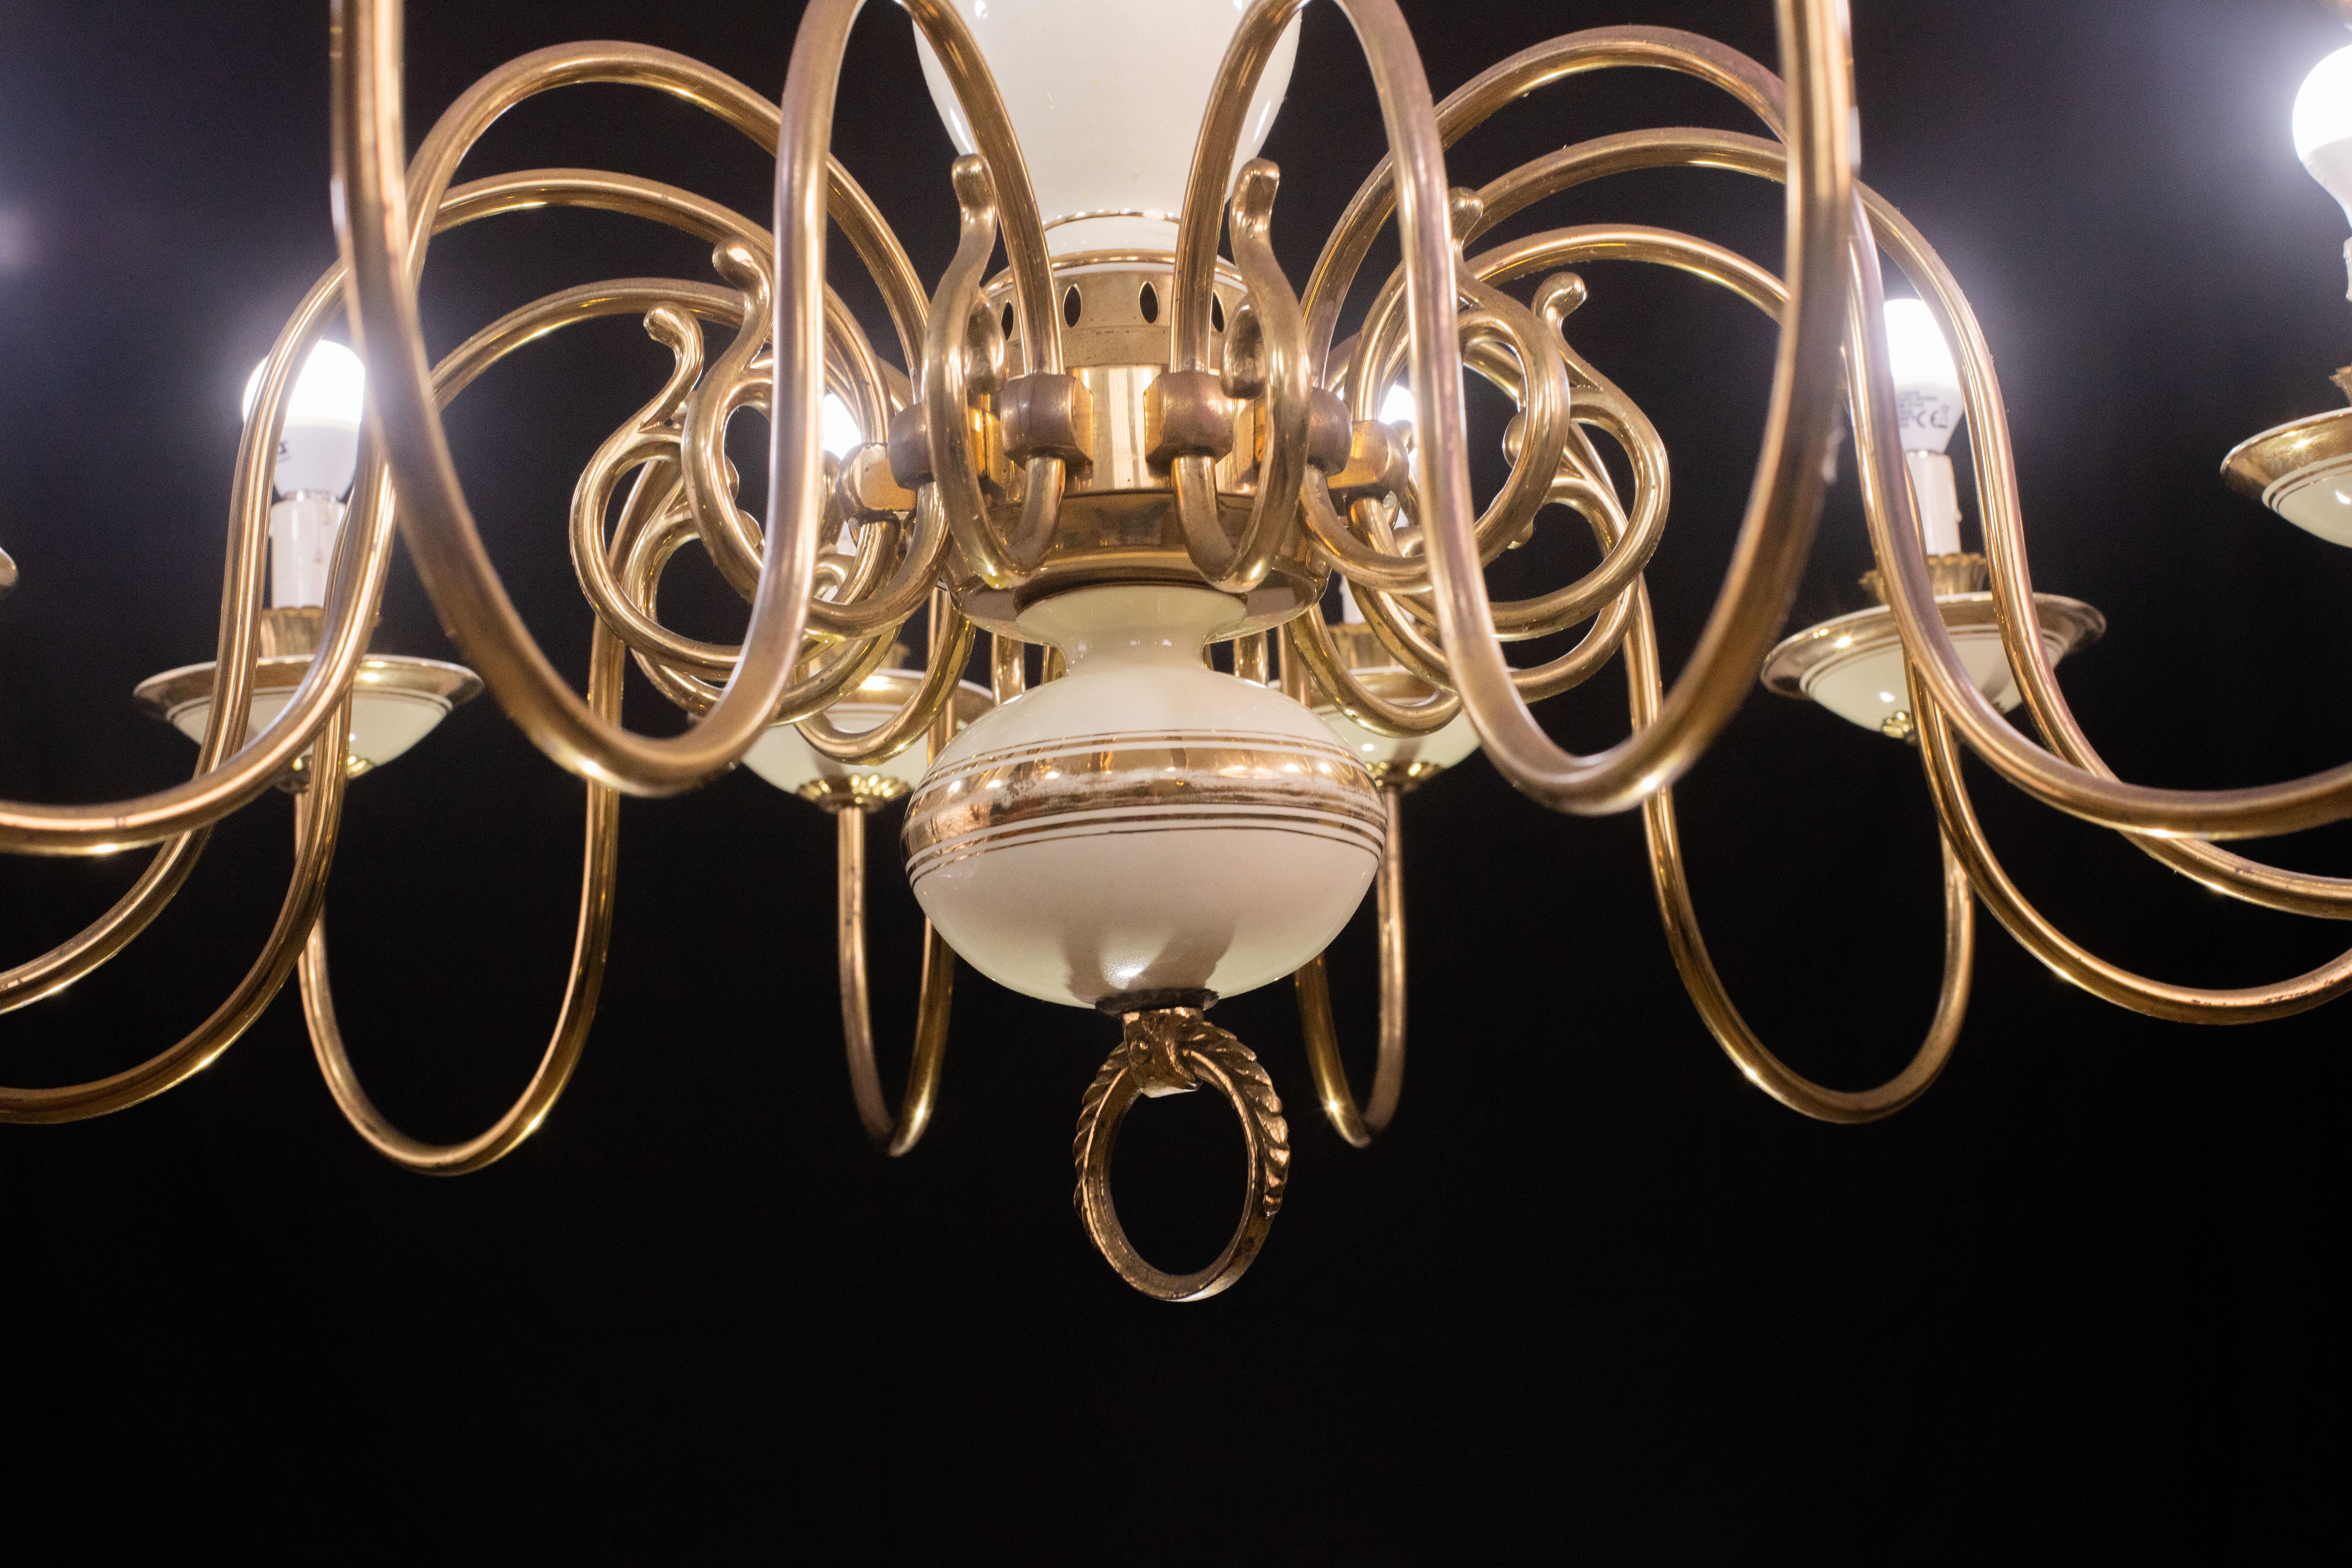 Monumental 12 Lights Art Deco Brass and Ceramic Chandelier, 1950s For Sale 5